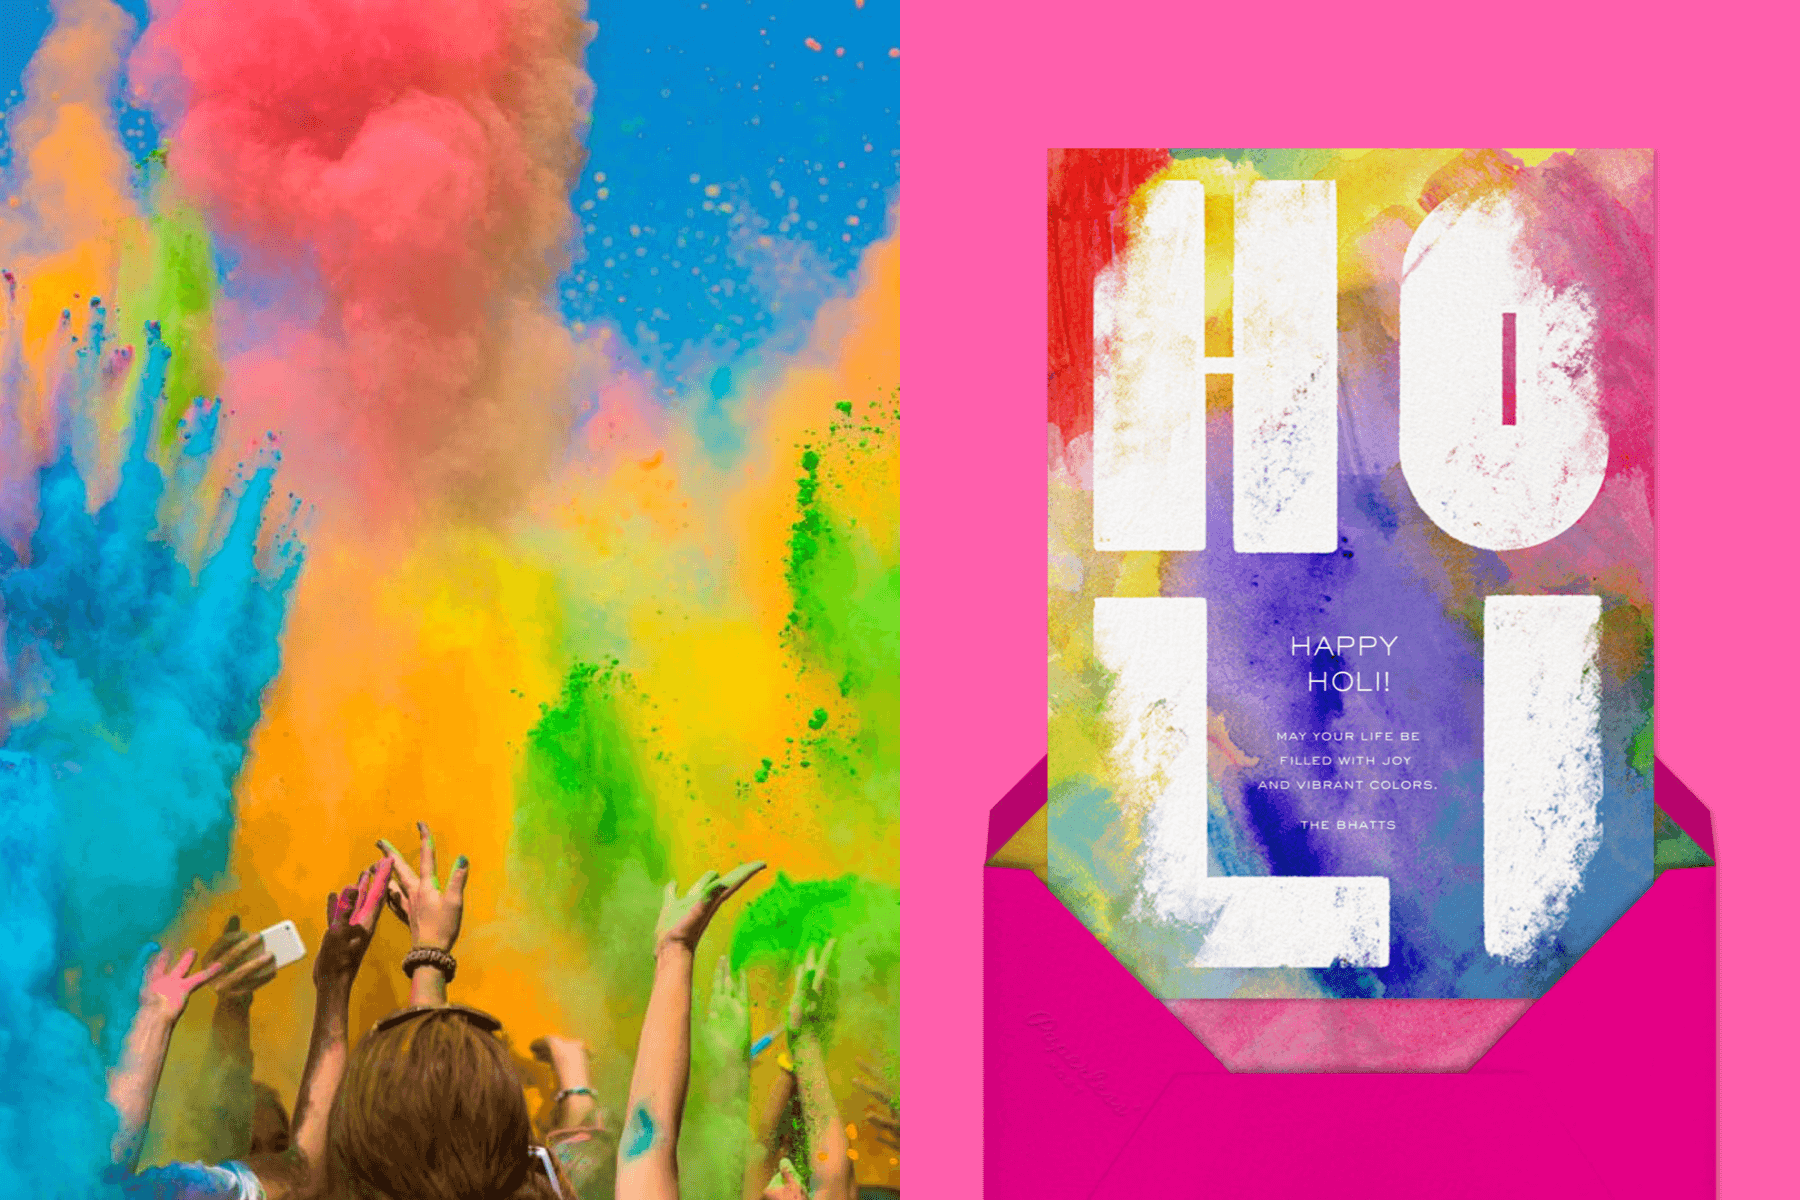 Left: Hands throwing colored powder in the air; Right: A Holi invitation with a tie dye effect.